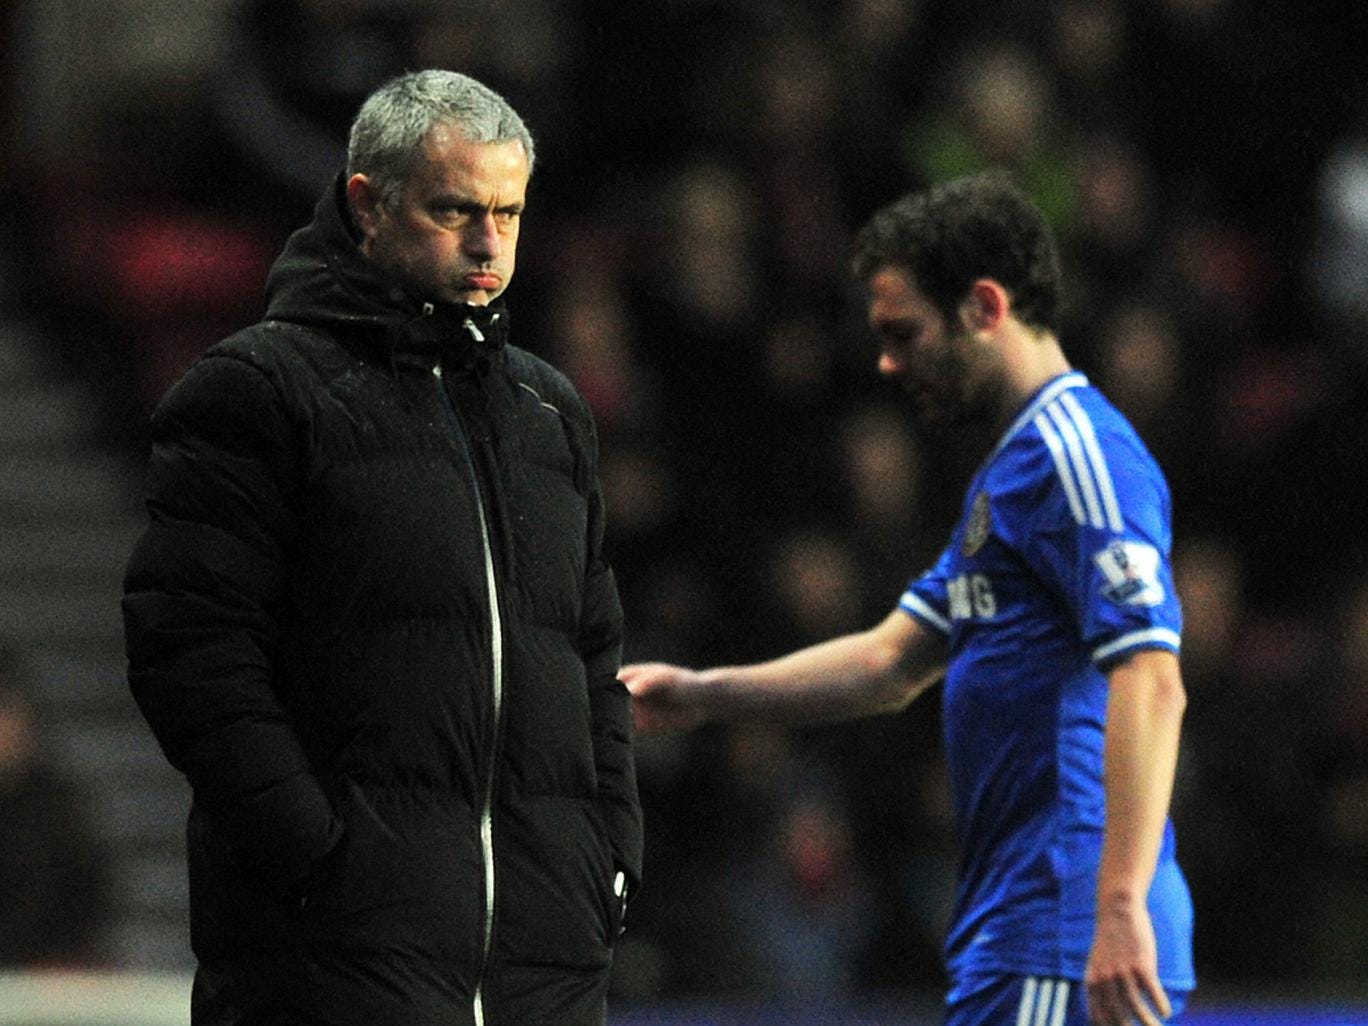 Juan Mata walks off the field without acknowledging his manager Jose Mourinho